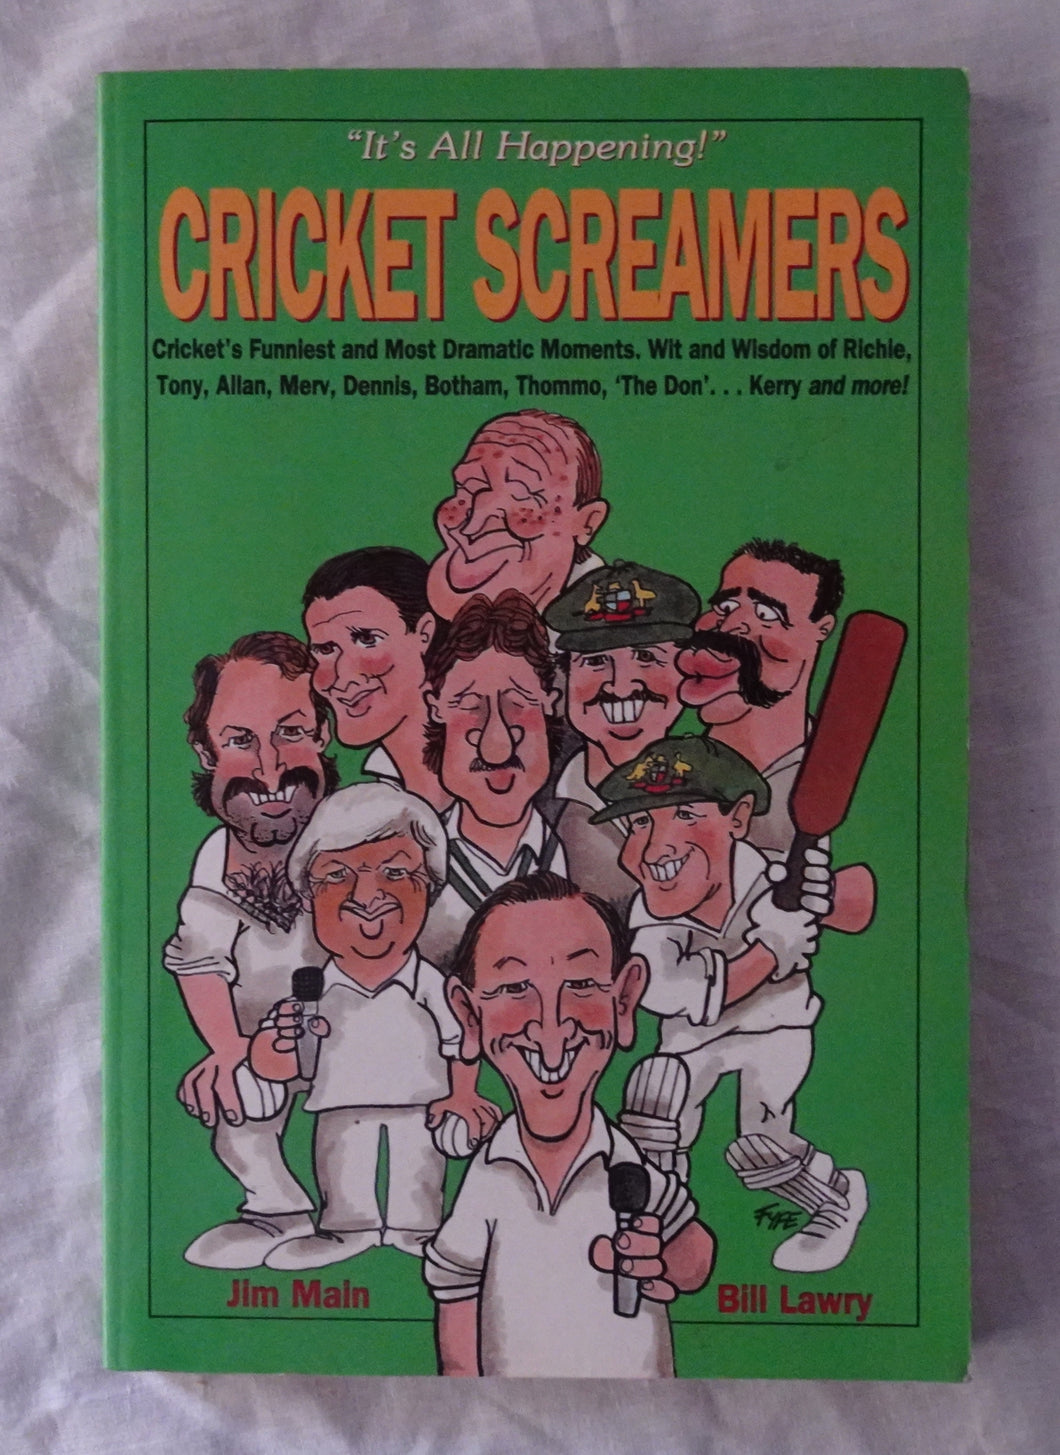 Cricket Screamers  Cricket’s Funniest and Most Dramatic Moments.  Wit and Wisdom of Richie, Tony, Allan, Merv, Dennis, Botham, Thommo, ‘The Don’…Kerry and more!  by Jim Main and Bill Lawry